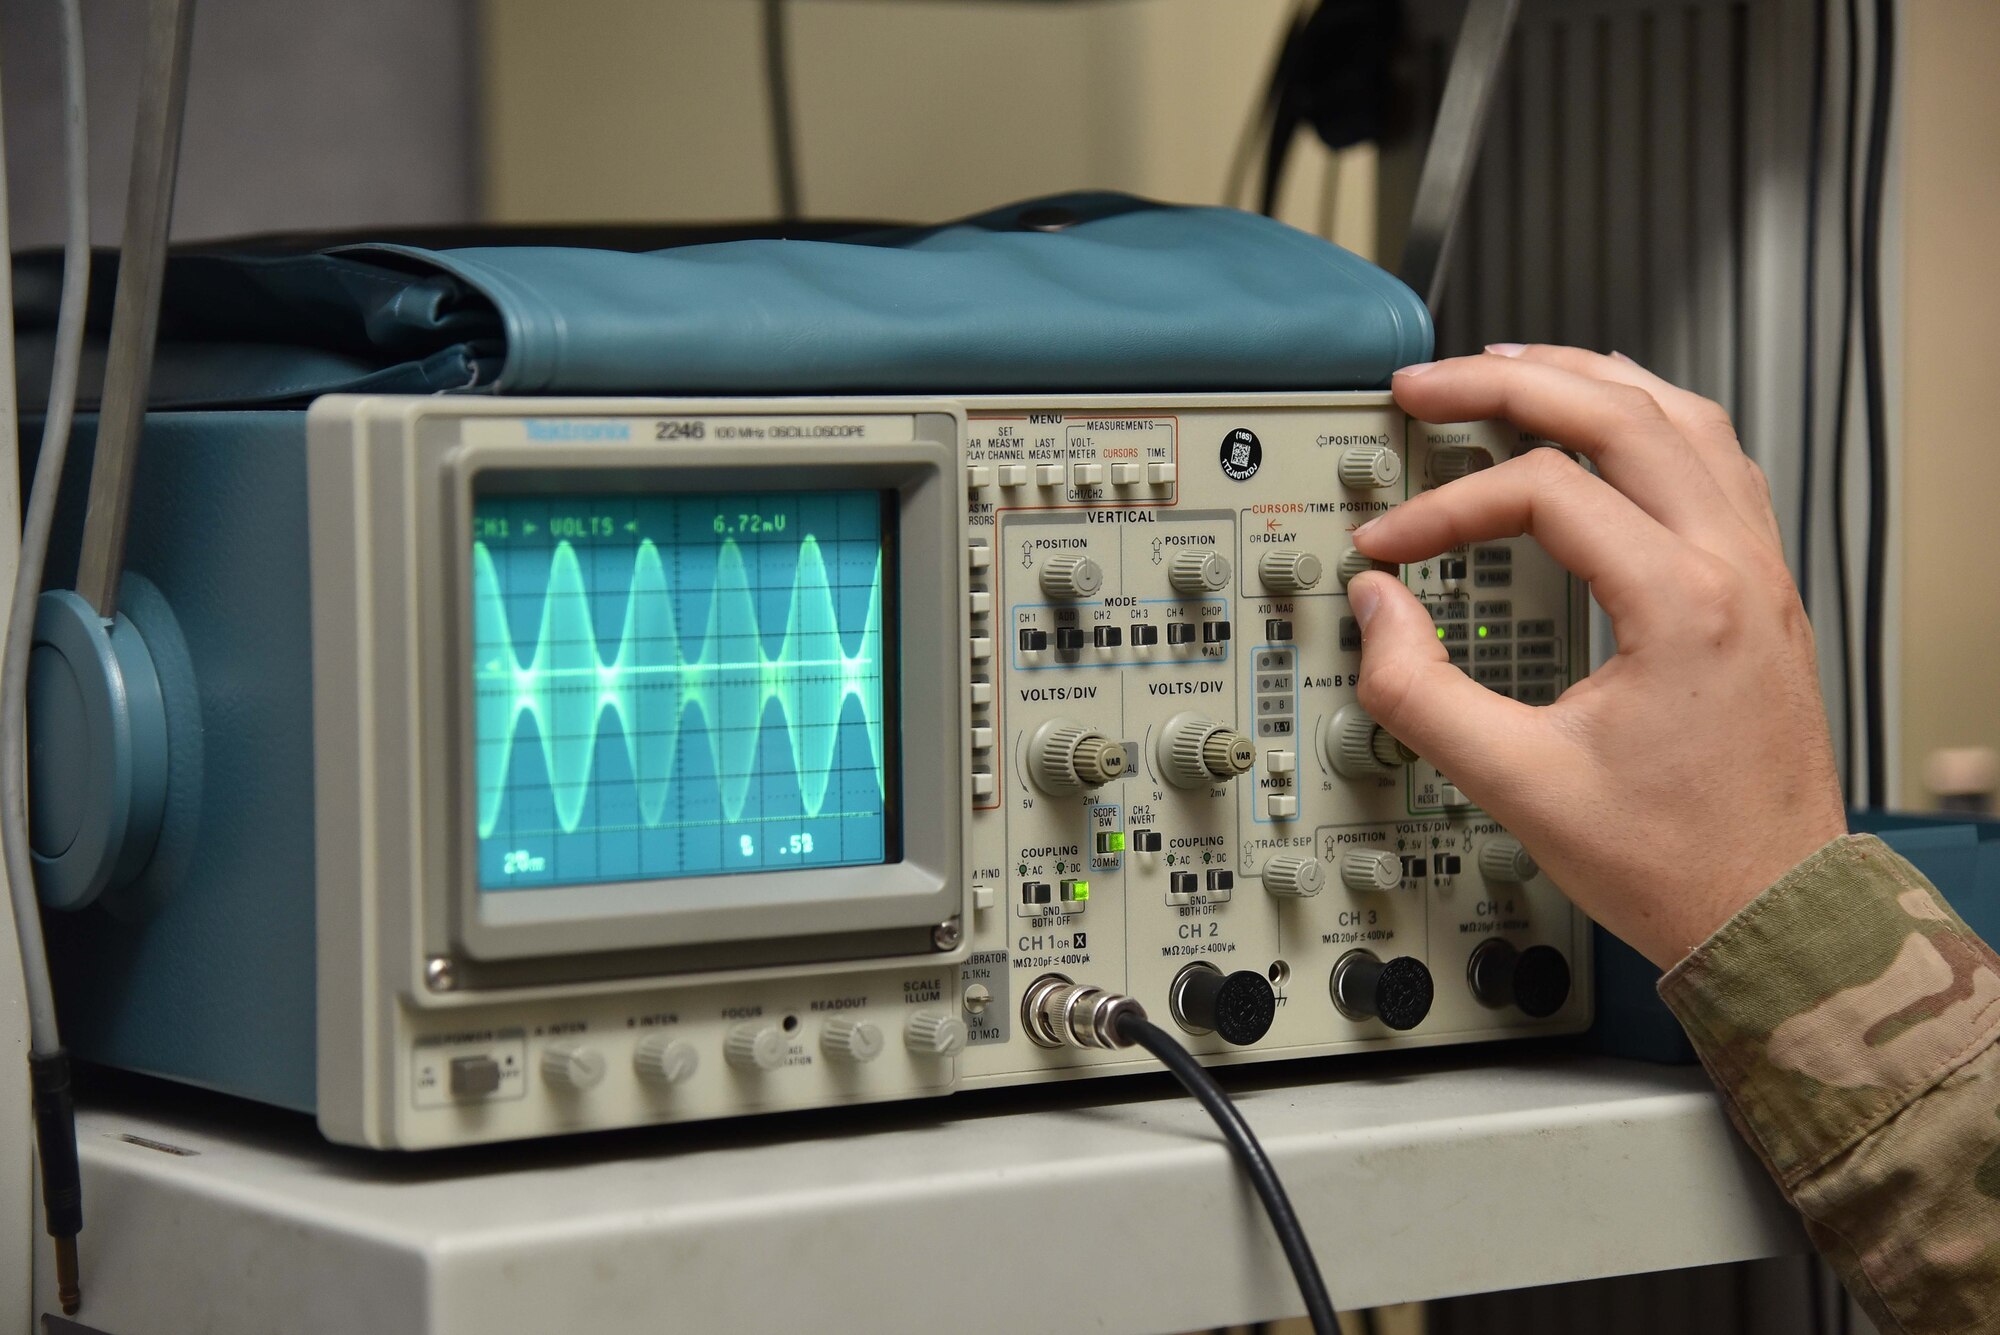 Airman 1st Class Adam Worley, 22nd Operations Support Squadron Radar, Airfield and Weather Systems technician, adjusts the radio frequency on an oscilloscope Aug. 13, 2019, at McConnell Air Force Base, Kan. The oscilloscope is used to create signals and capture responses from electronic devices under test. (U.S. Air Force photo by Airman 1st Class Marc A. Garcia)